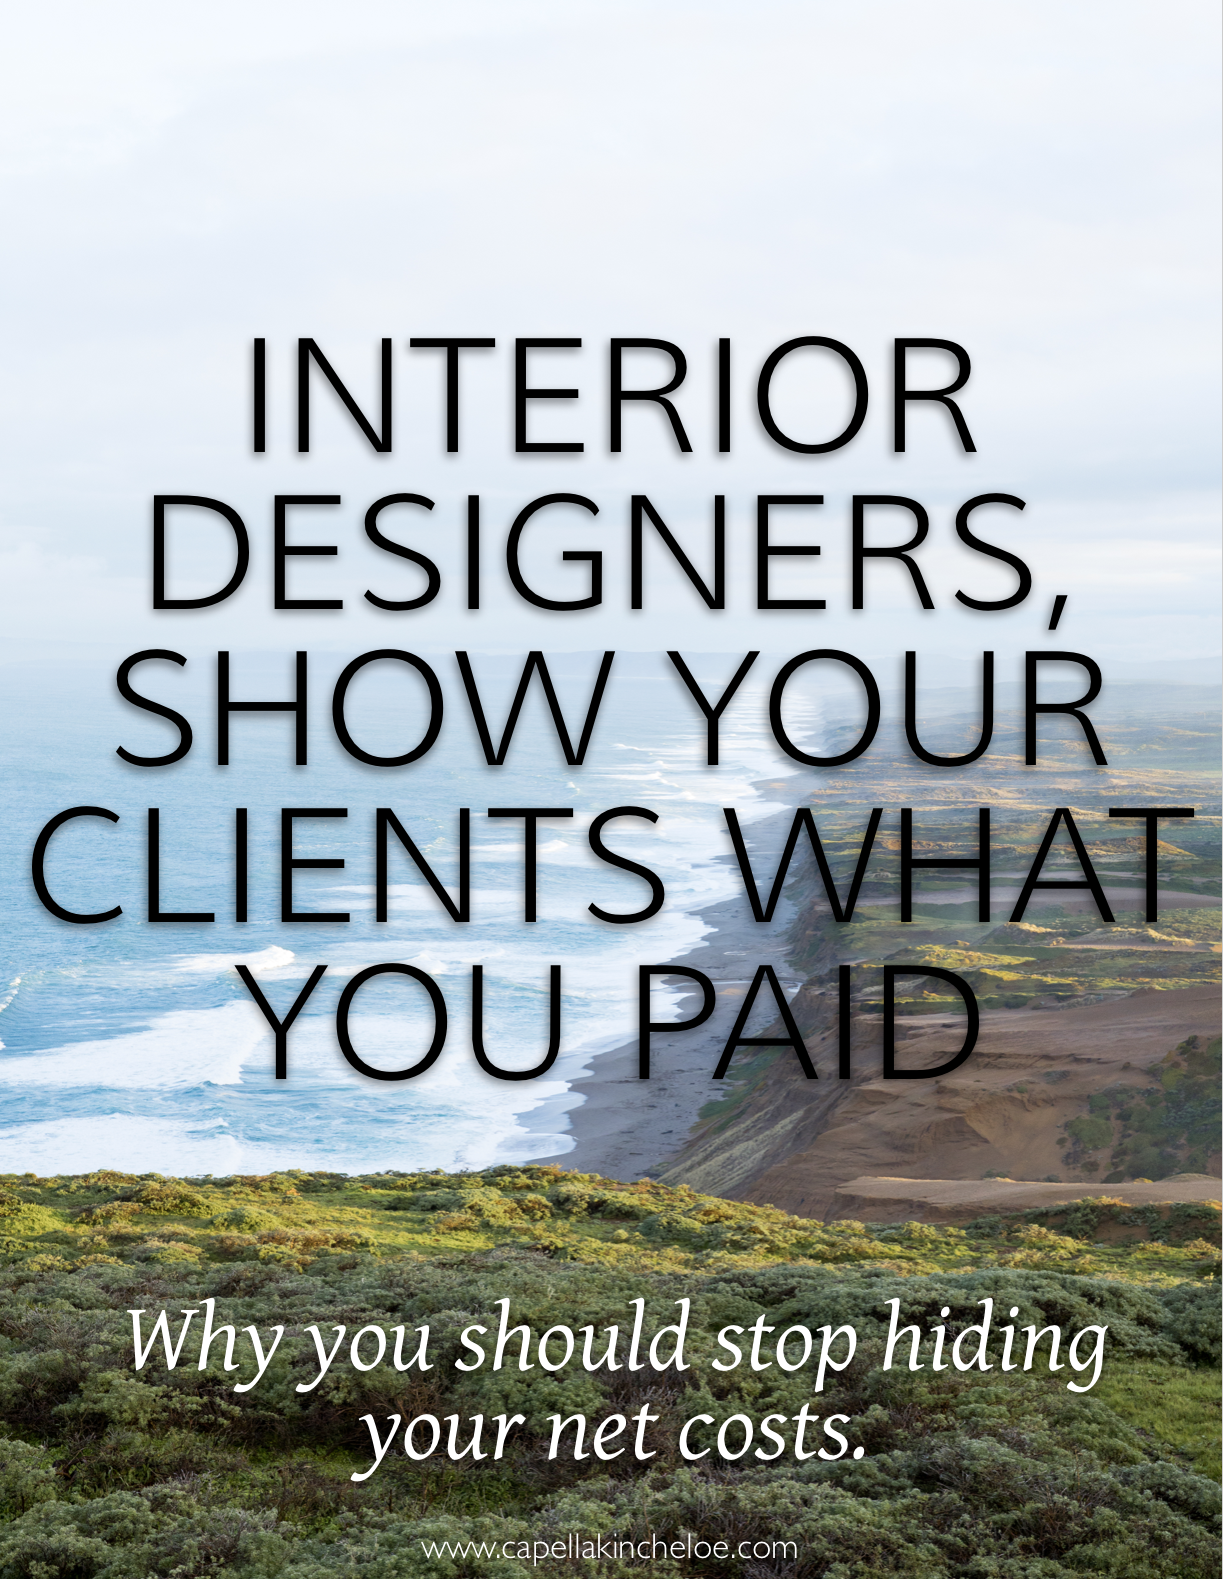 Designers Show Your Clients What You Paid Capella Kincheloe